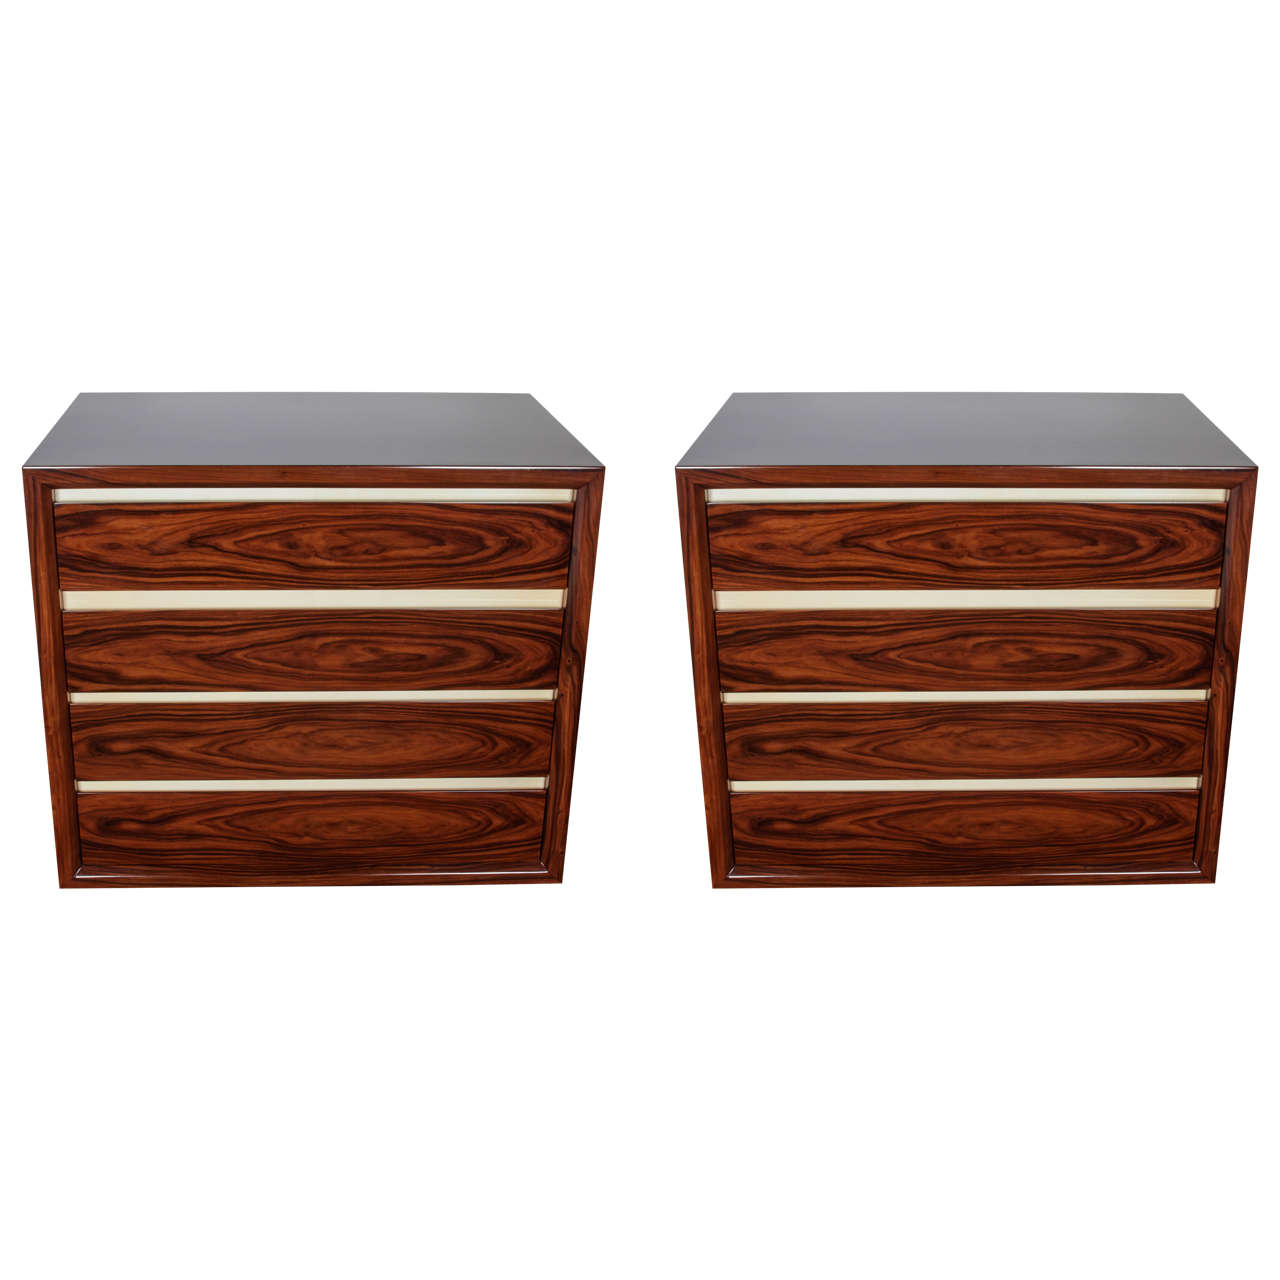 Exquisite pair of chests comprised of book matched rosewood with lacquered parchment (goatskin) trim. Each dresser is fitted with four drawers that feature a soft push-close. The commodes have streamline design and are handsome from all angles.